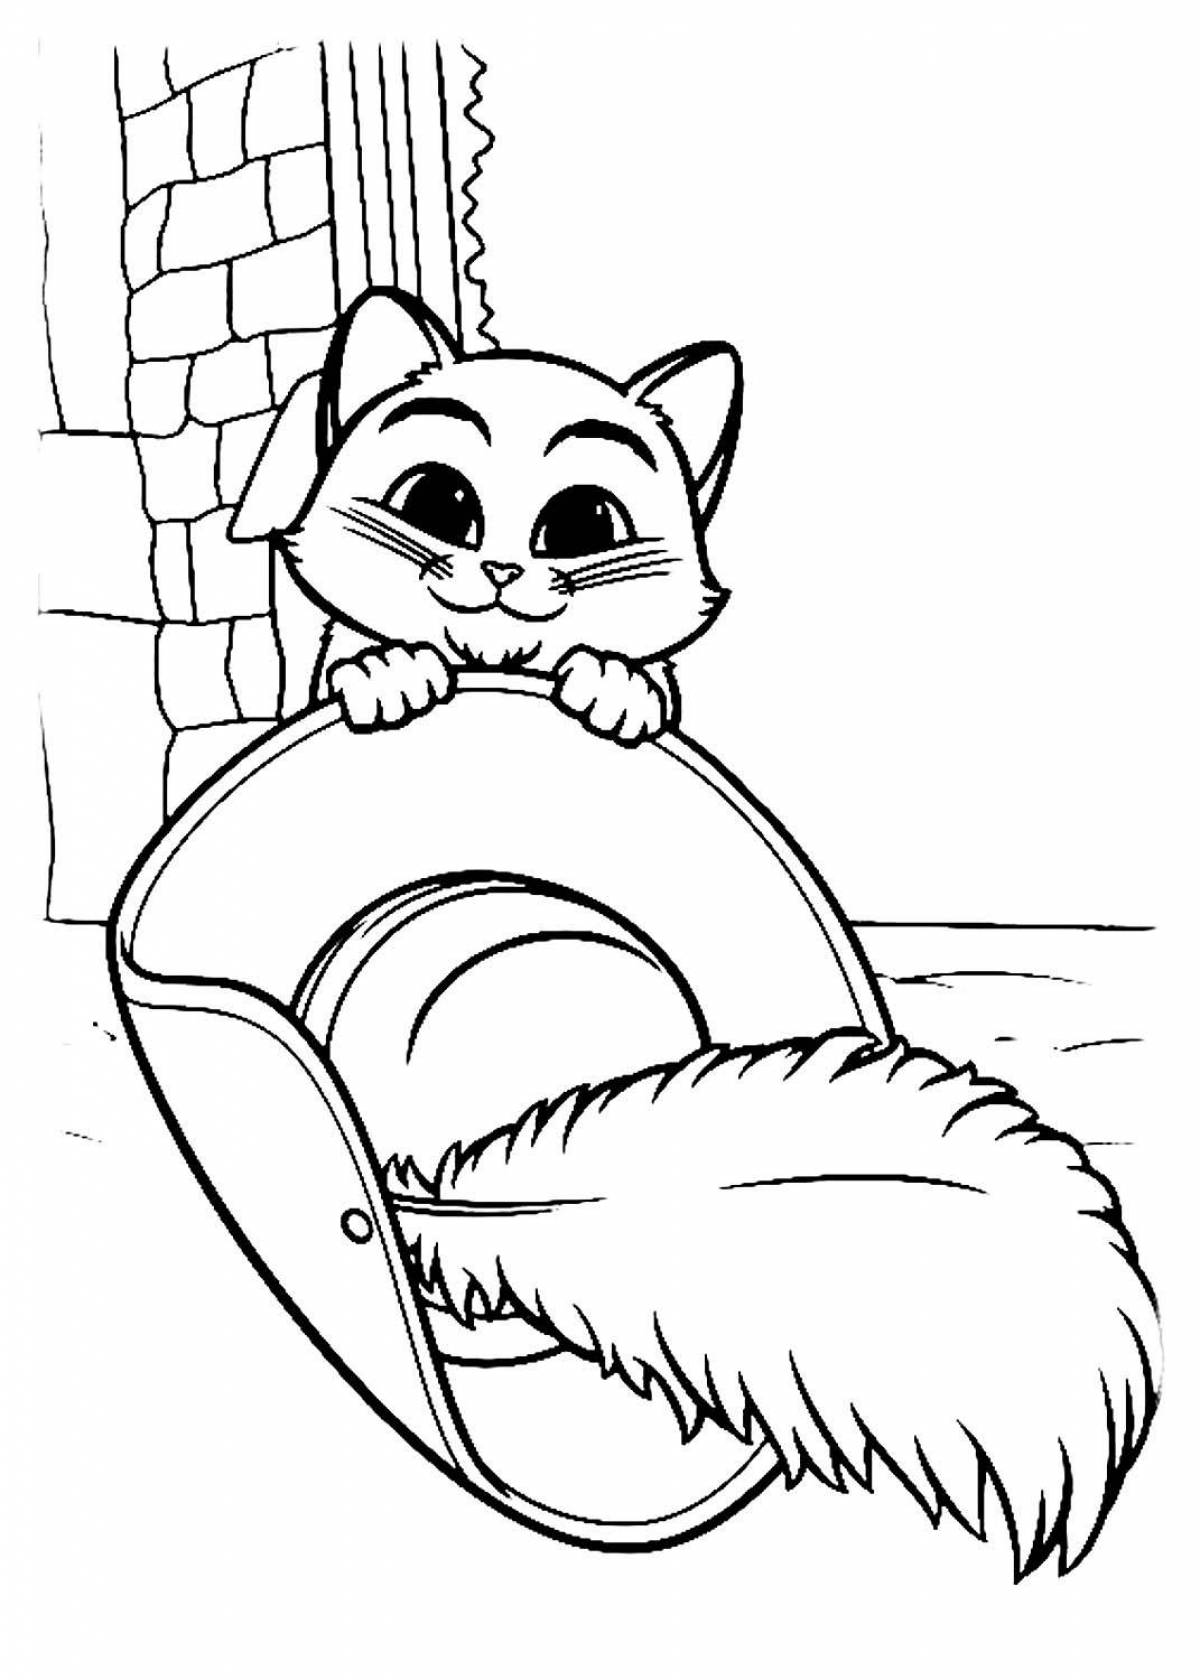 Coloring page magic puss in boots for kids